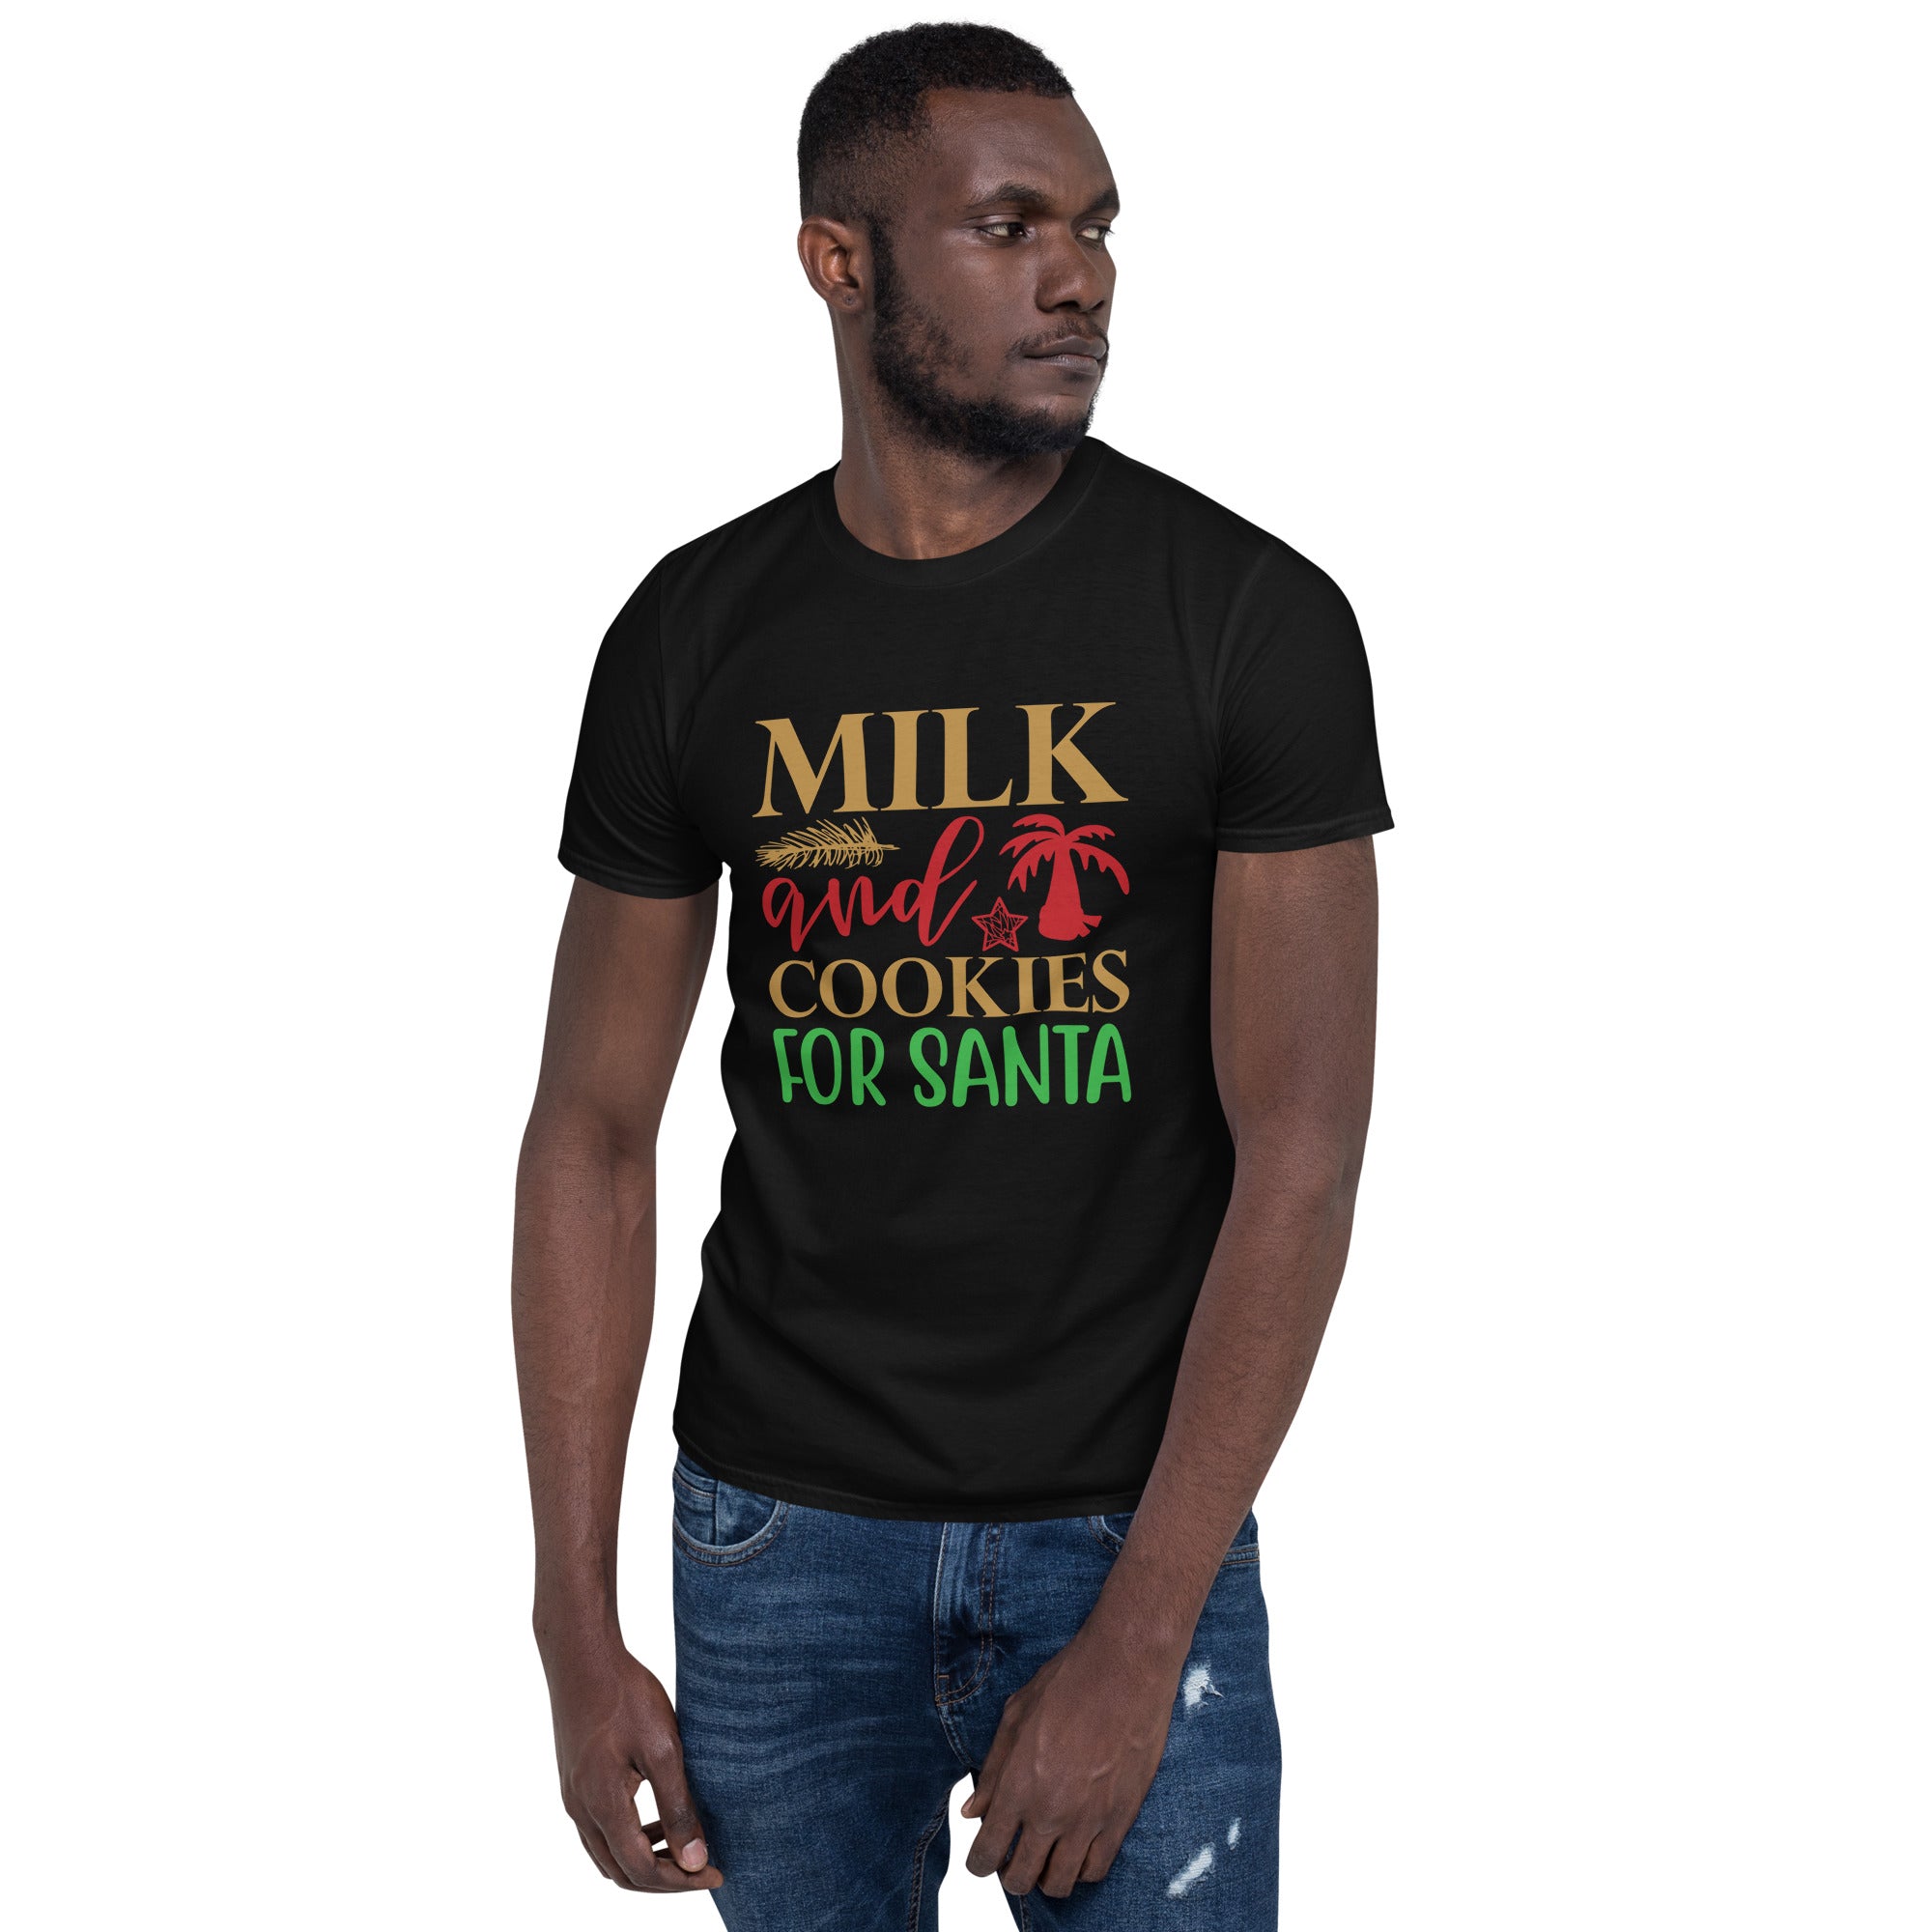 Milk And Cookies For Santa - Short-Sleeve Unisex T-Shirt